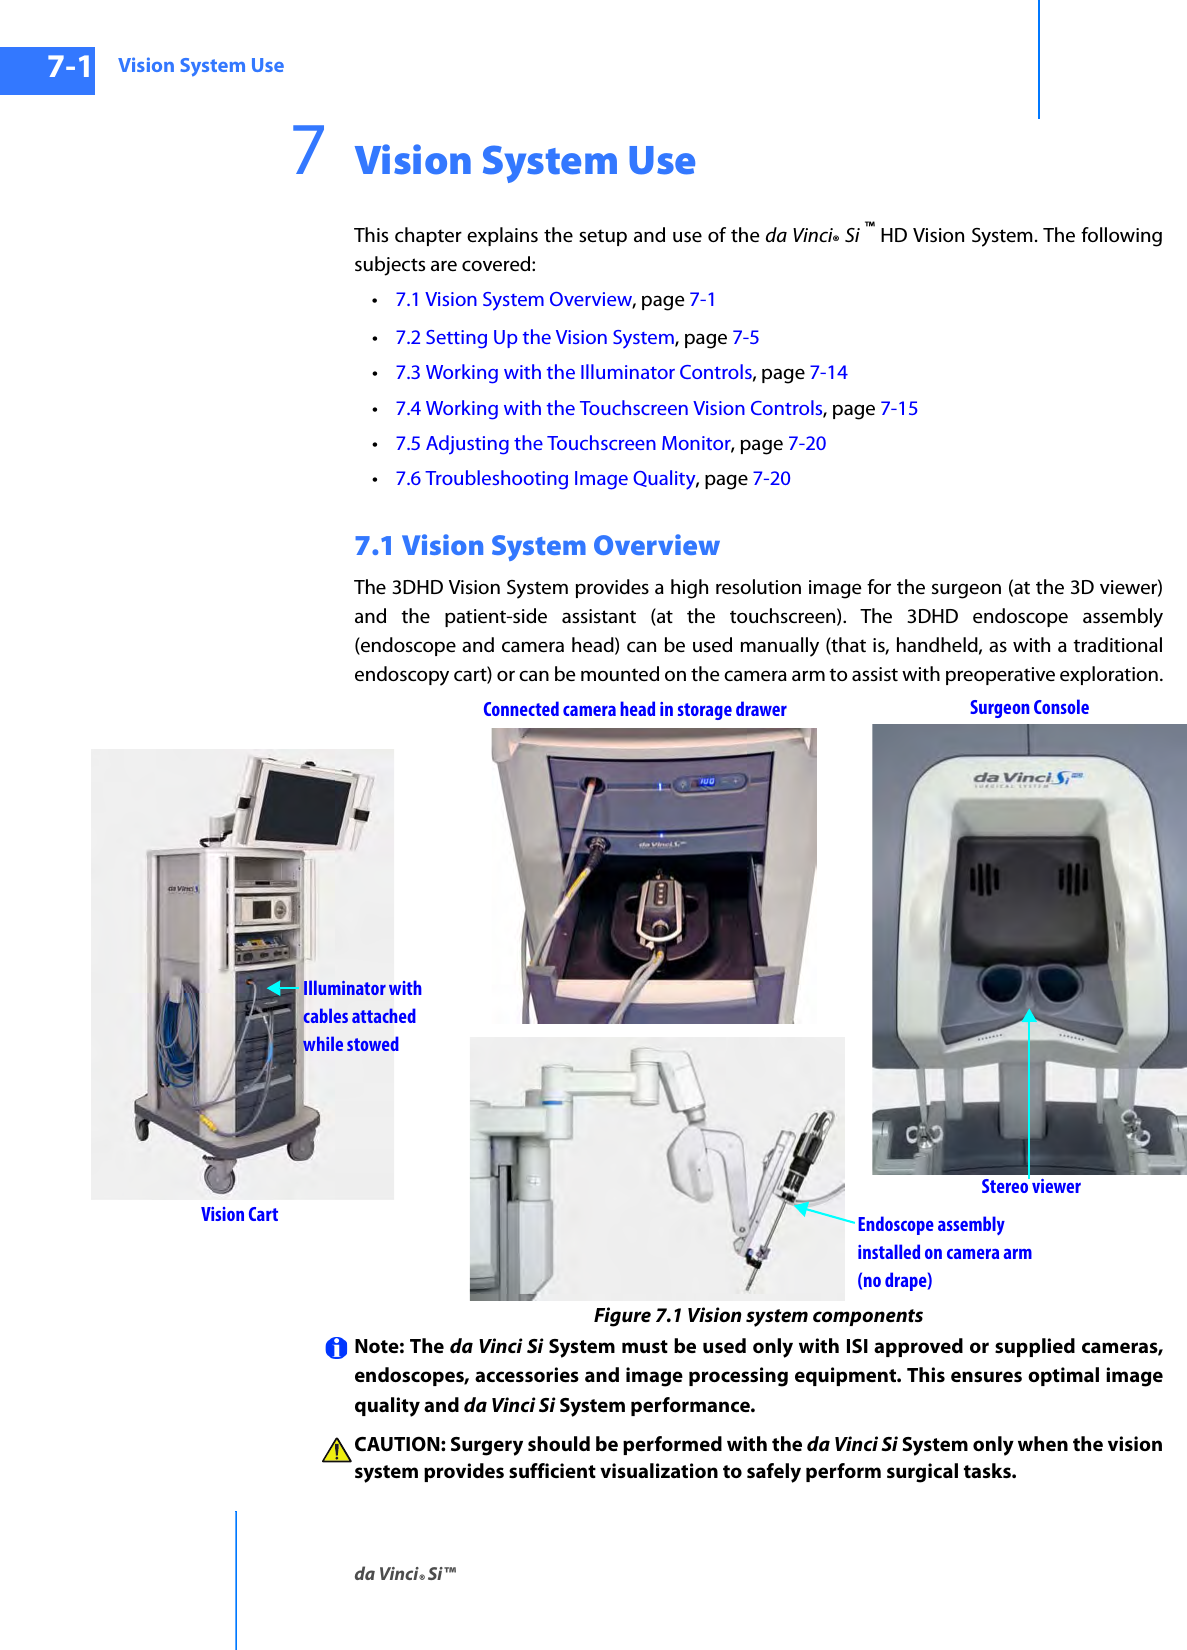 Vision System Useda Vinci® Si™7-1DRAFT/PRE-RELEASE/CONFIDENTIAL10/9/147Vision System UseThis chapter explains the setup and use of the da Vinci® Si ™ HD Vision System. The following subjects are covered: •7.1 Vision System Overview, page 7-1 •7.2 Setting Up the Vision System, page 7-5•7.3 Working with the Illuminator Controls, page 7-14•7.4 Working with the Touchscreen Vision Controls, page 7-15•7.5 Adjusting the Touchscreen Monitor, page 7-20•7.6 Troubleshooting Image Quality, page 7-207.1 Vision System OverviewThe 3DHD Vision System provides a high resolution image for the surgeon (at the 3D viewer) and the patient-side assistant (at the touchscreen). The 3DHD endoscope assembly (endoscope and camera head) can be used manually (that is, handheld, as with a traditional endoscopy cart) or can be mounted on the camera arm to assist with preoperative exploration.Figure 7.1 Vision system components Note: The da Vinci Si System must be used only with ISI approved or supplied cameras, endoscopes, accessories and image processing equipment. This ensures optimal image quality and da Vinci Si System performance. CAUTION: Surgery should be performed with the da Vinci Si System only when the vision system provides sufficient visualization to safely perform surgical tasks.Surgeon ConsoleStereo viewerIlluminator withcables attachedwhile stowedEndoscope assembly installed on camera armVision Cart(no drape)Connected camera head in storage drawer